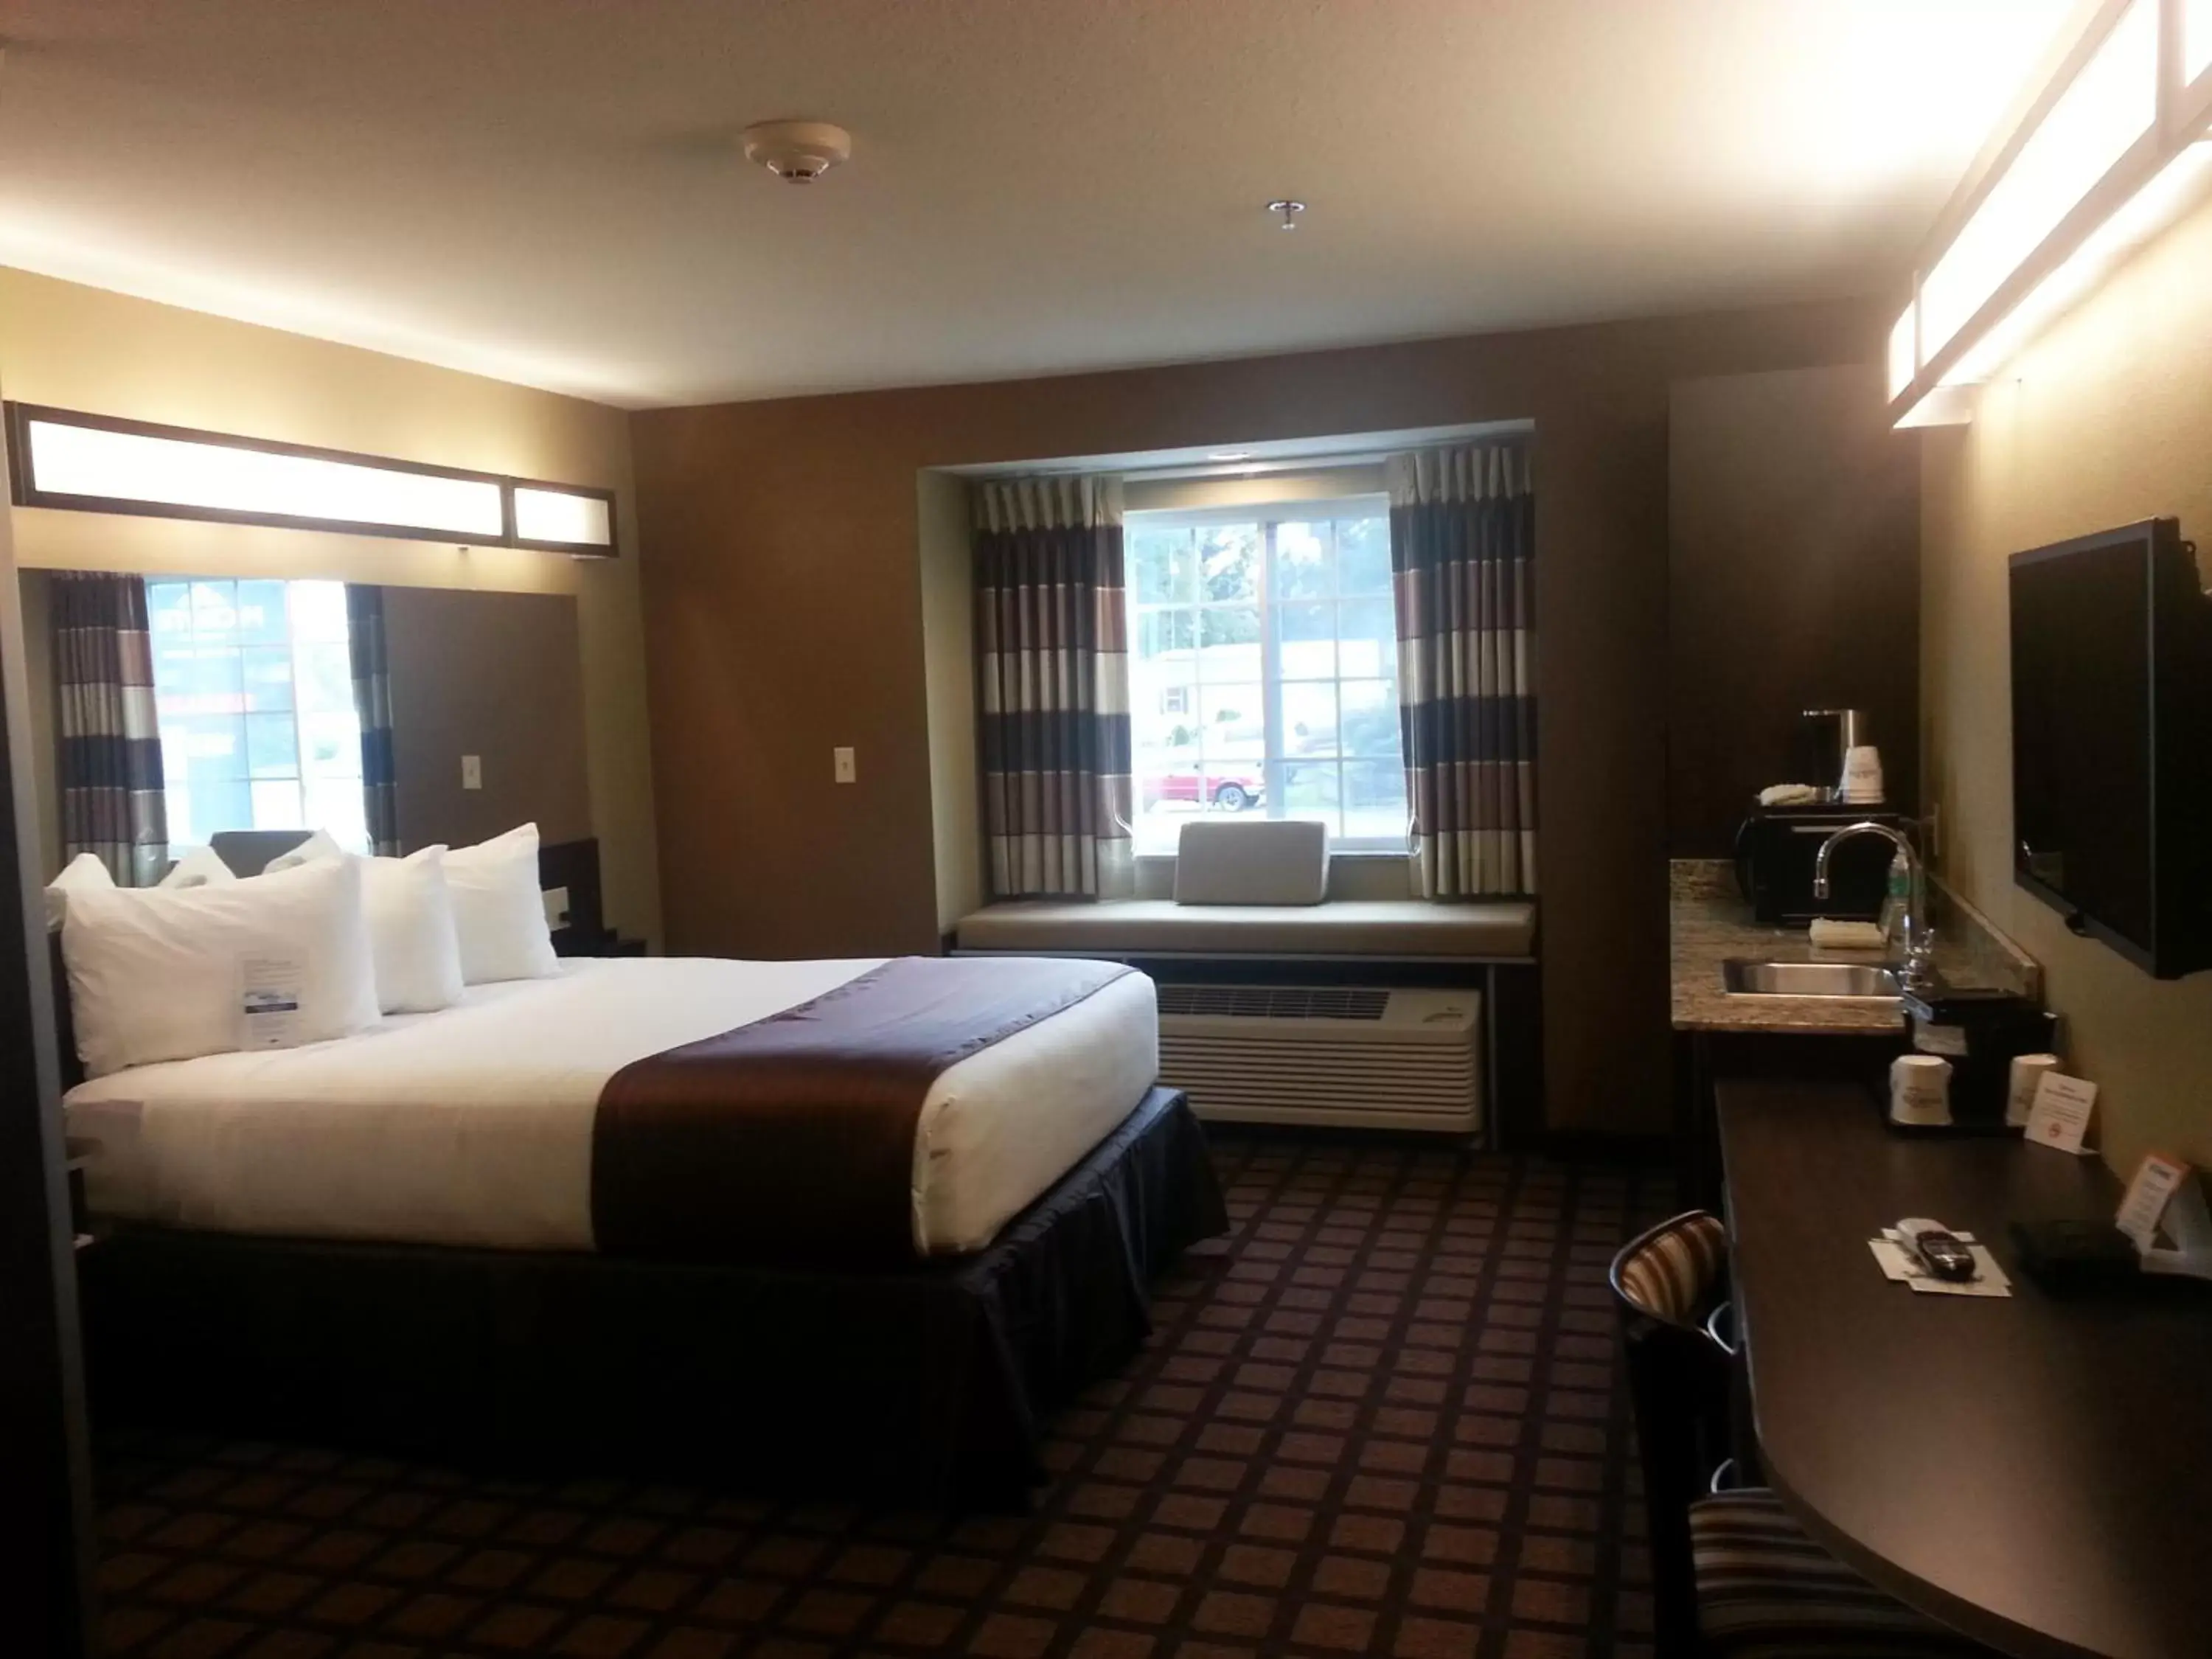 TV and multimedia in Microtel Inn and Suites Carrollton